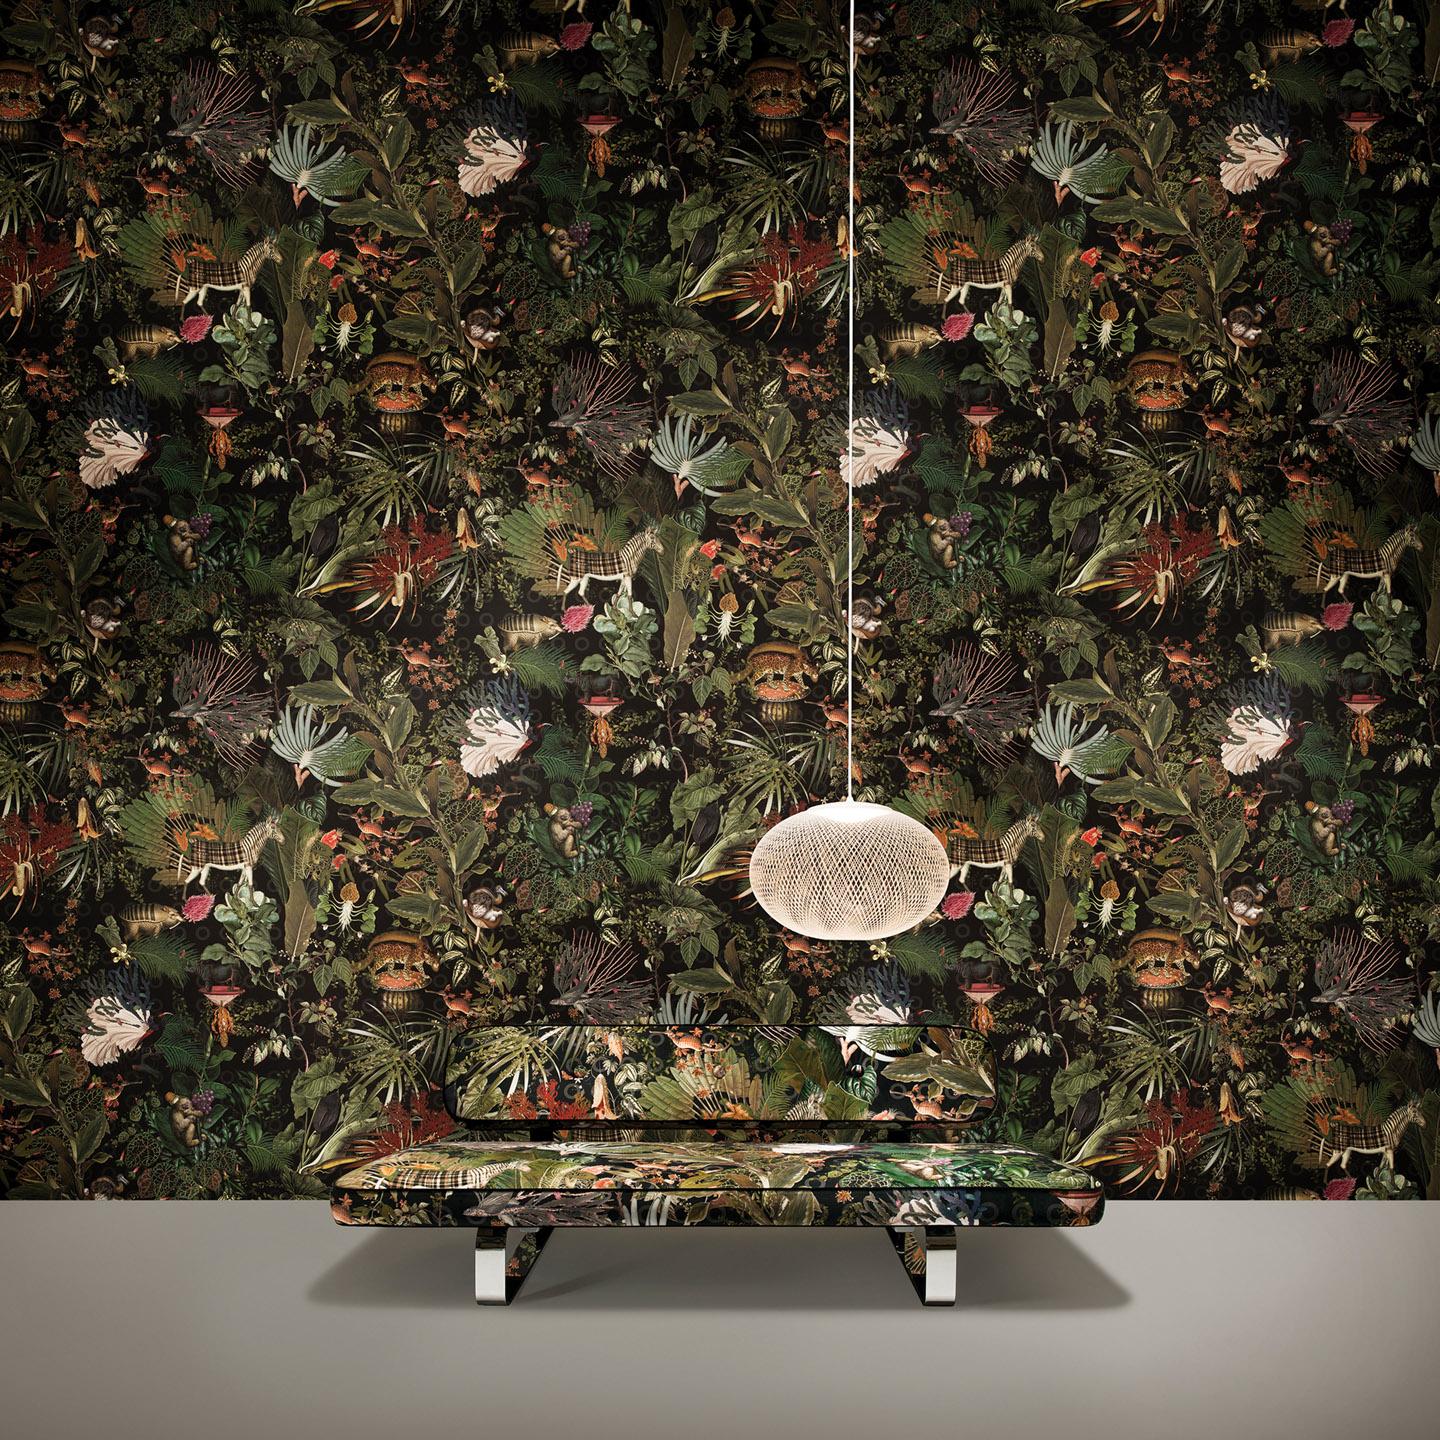 Arte Moooi's wallpapers take inspiration from images of flora and fauna